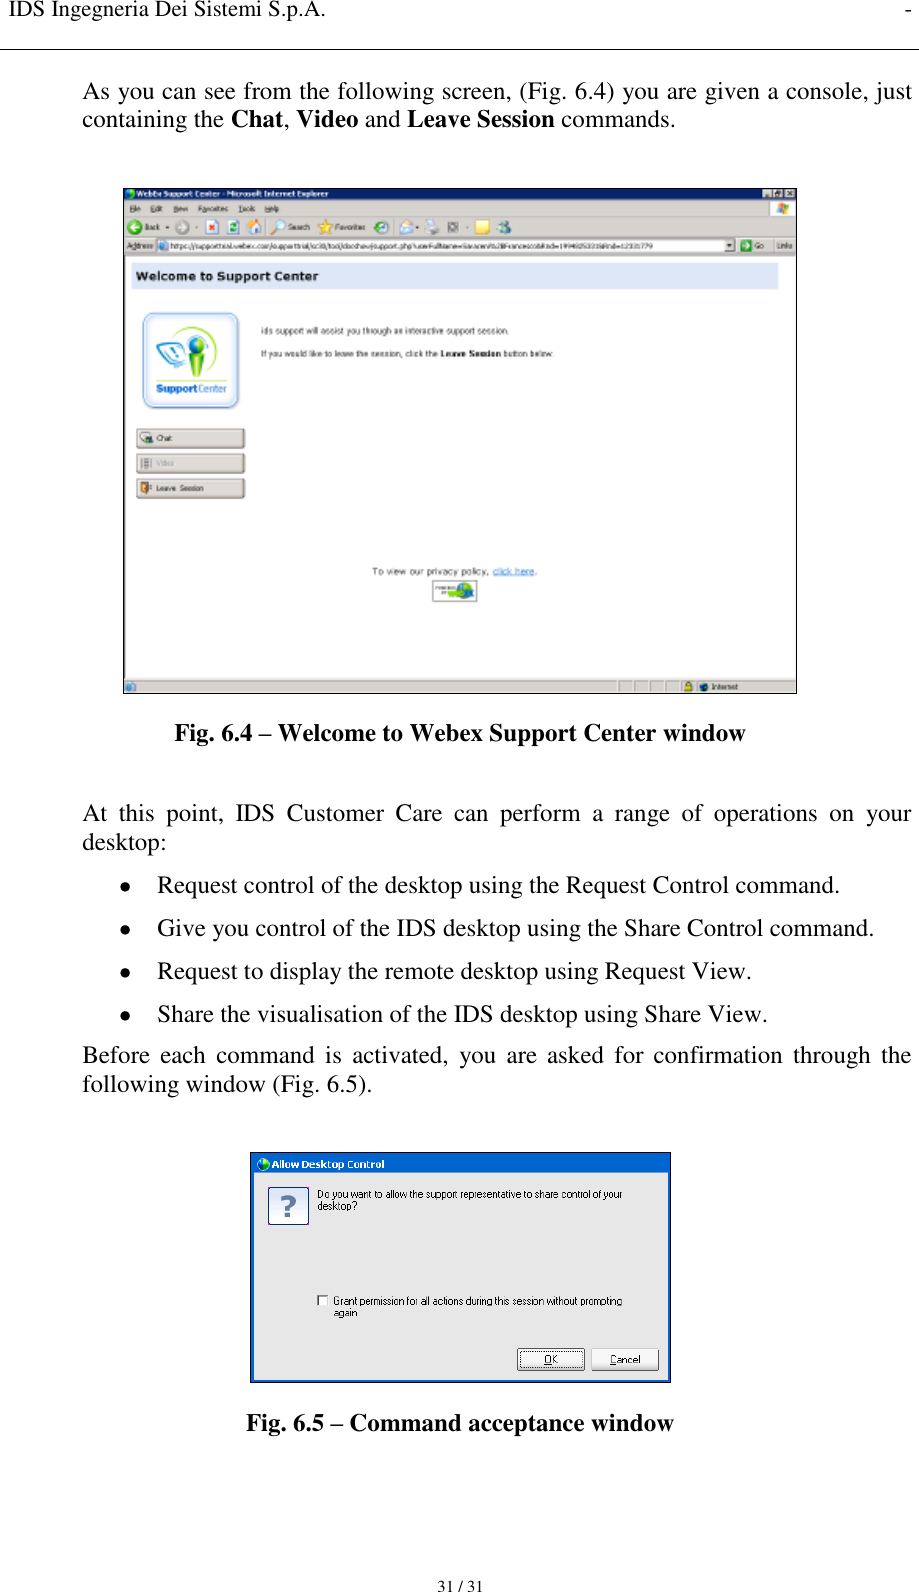 IDS Ingegneria Dei Sistemi S.p.A. -     31 / 31 As you can see from the following screen, (Fig. 6.4) you are given a console, just containing the Chat, Video and Leave Session commands.   Fig. 6.4 – Welcome to Webex Support Center window  At  this  point,  IDS  Customer  Care  can  perform  a  range  of  operations  on  your desktop:  Request control of the desktop using the Request Control command.  Give you control of the IDS desktop using the Share Control command.  Request to display the remote desktop using Request View.  Share the visualisation of the IDS desktop using Share View. Before  each command  is  activated,  you are  asked  for  confirmation  through  the following window (Fig. 6.5).   Fig. 6.5 – Command acceptance window 